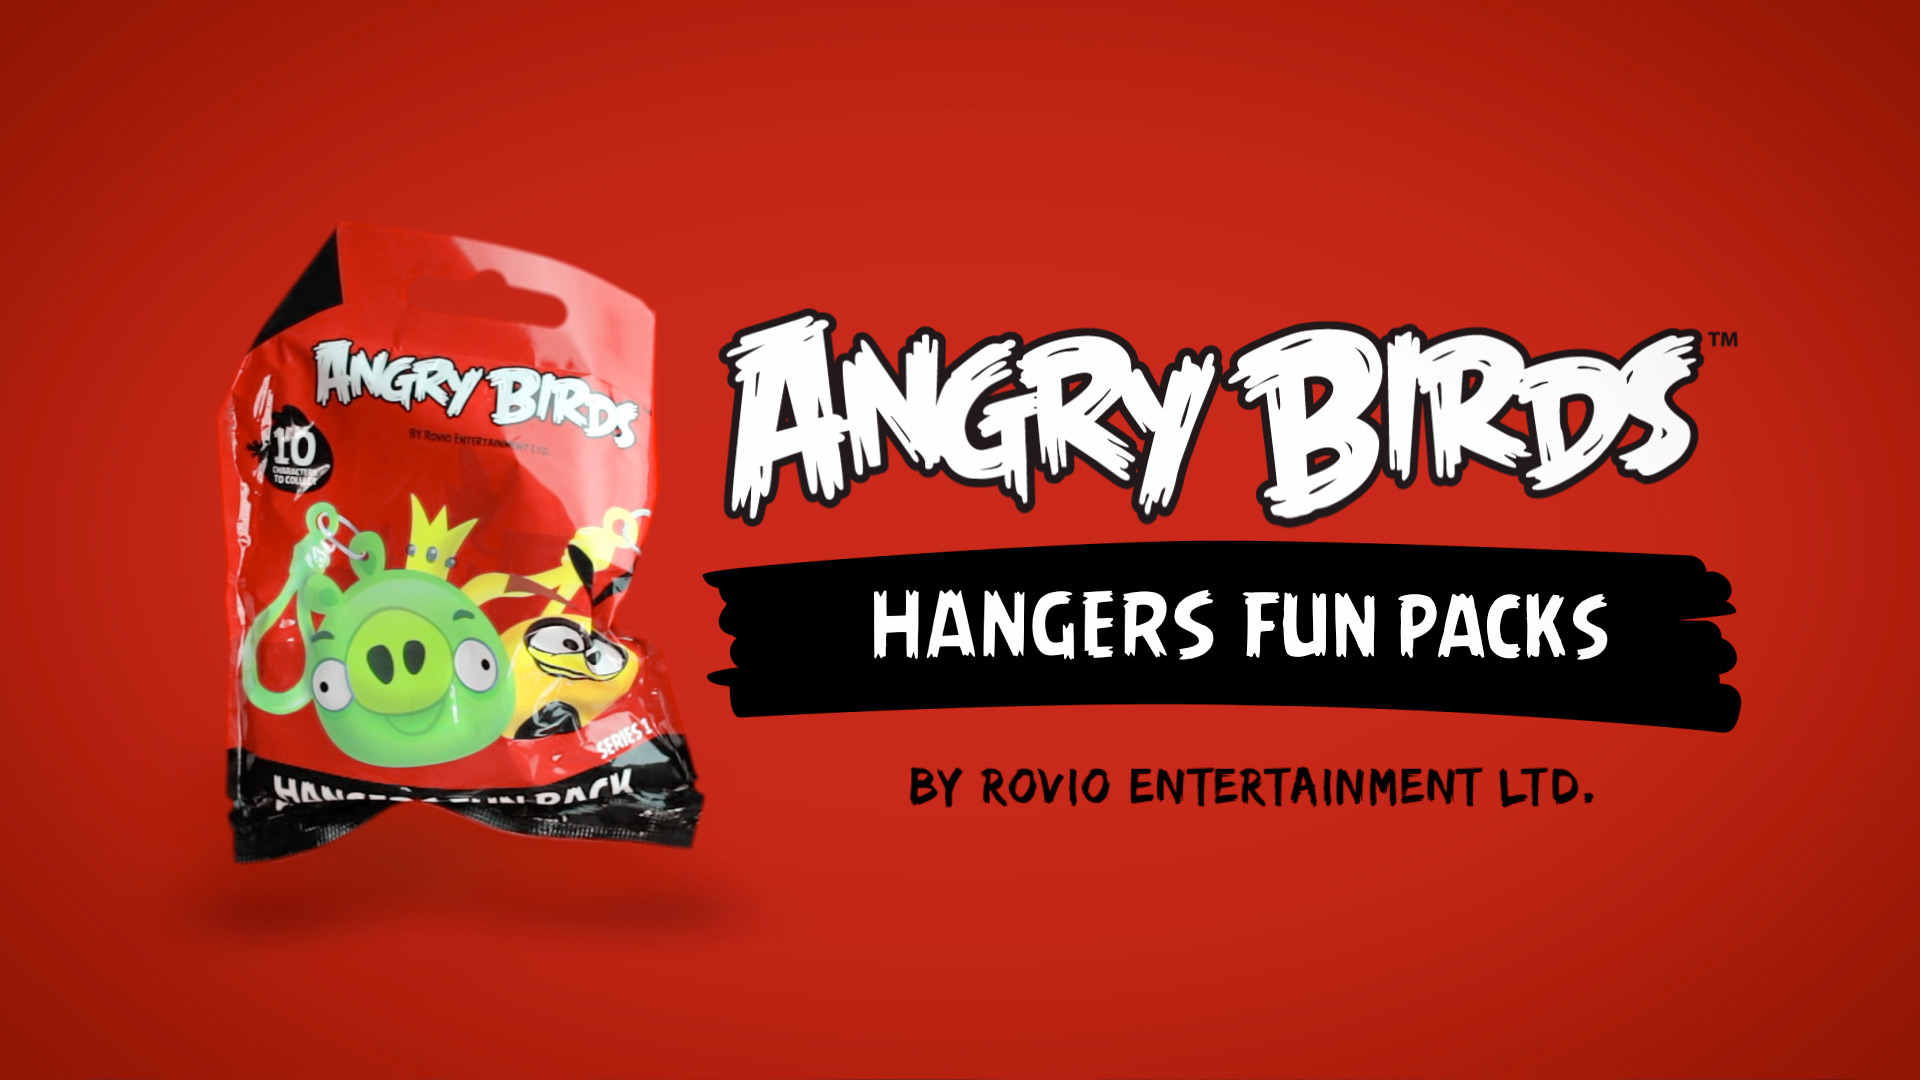 Angry Birds | Hangers Fun Packs Commercial